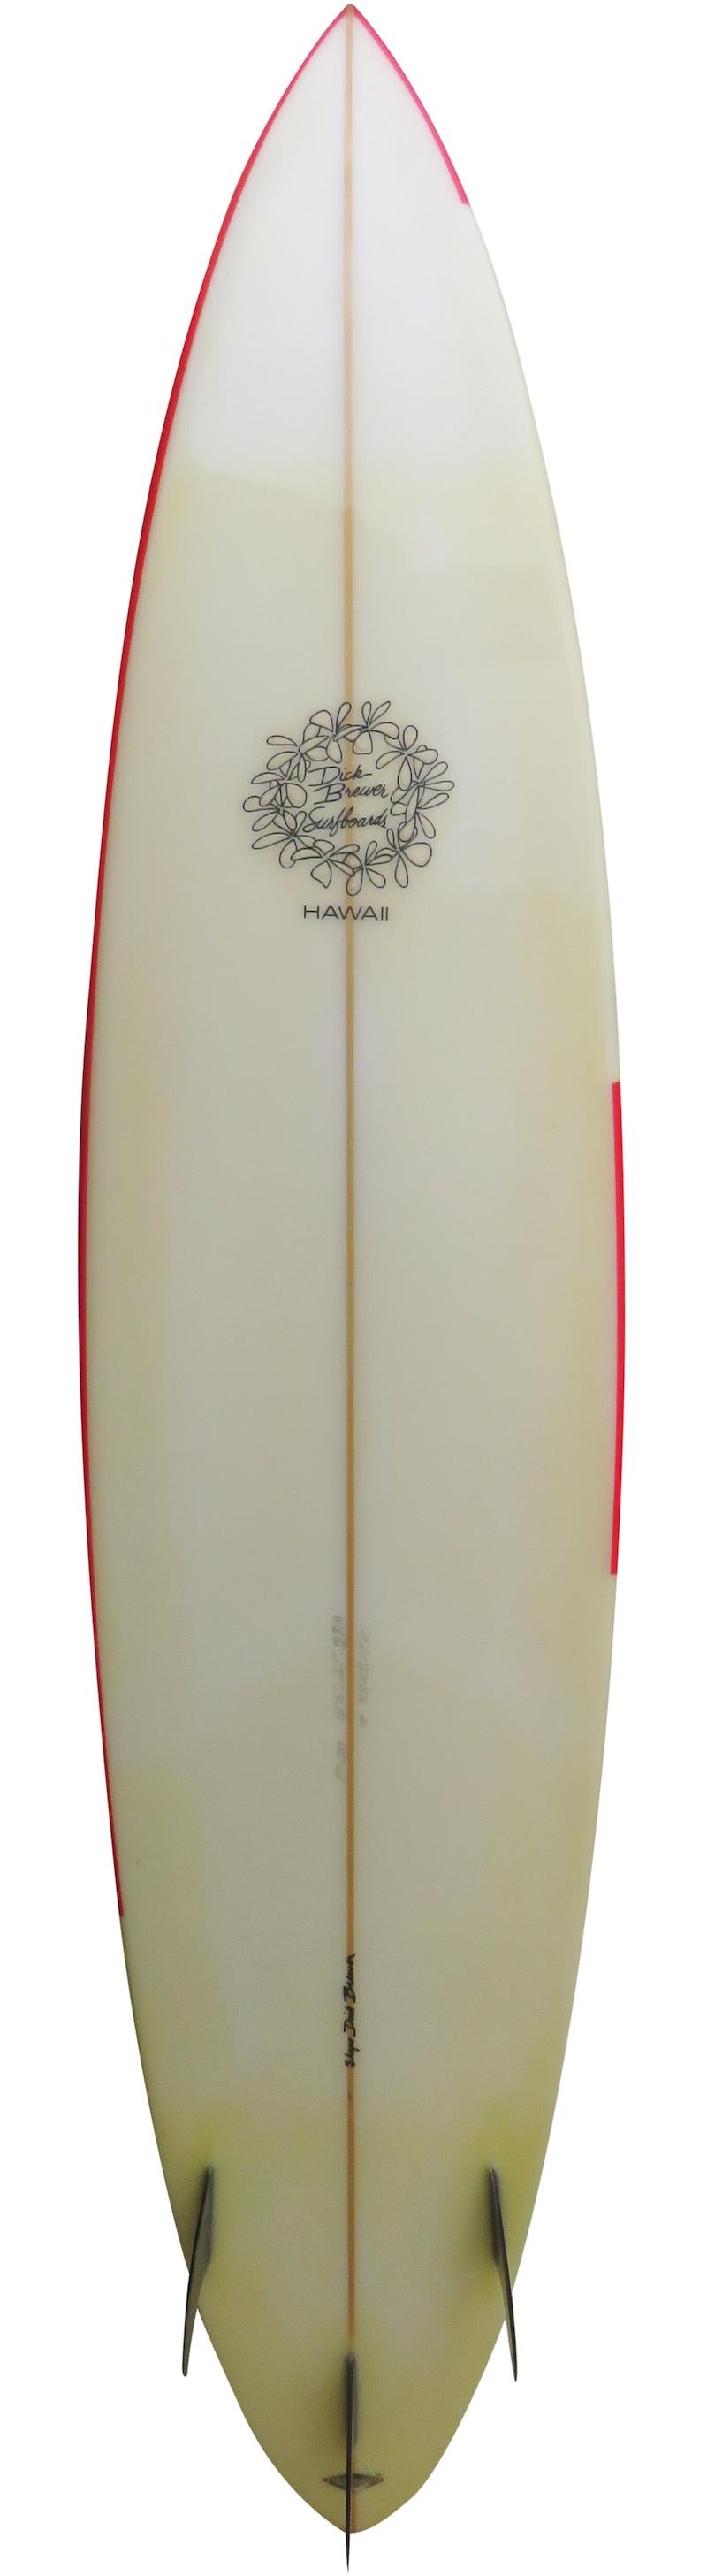 Collectible Dick Brewer shaped big wave gun surfboard. Featuring a red flame airbrush design and glassed on thruster (tri-fin) setup. This surfboard is in all original condition.

Dick Brewer is a world famous pioneer surfboard designer and shaper.